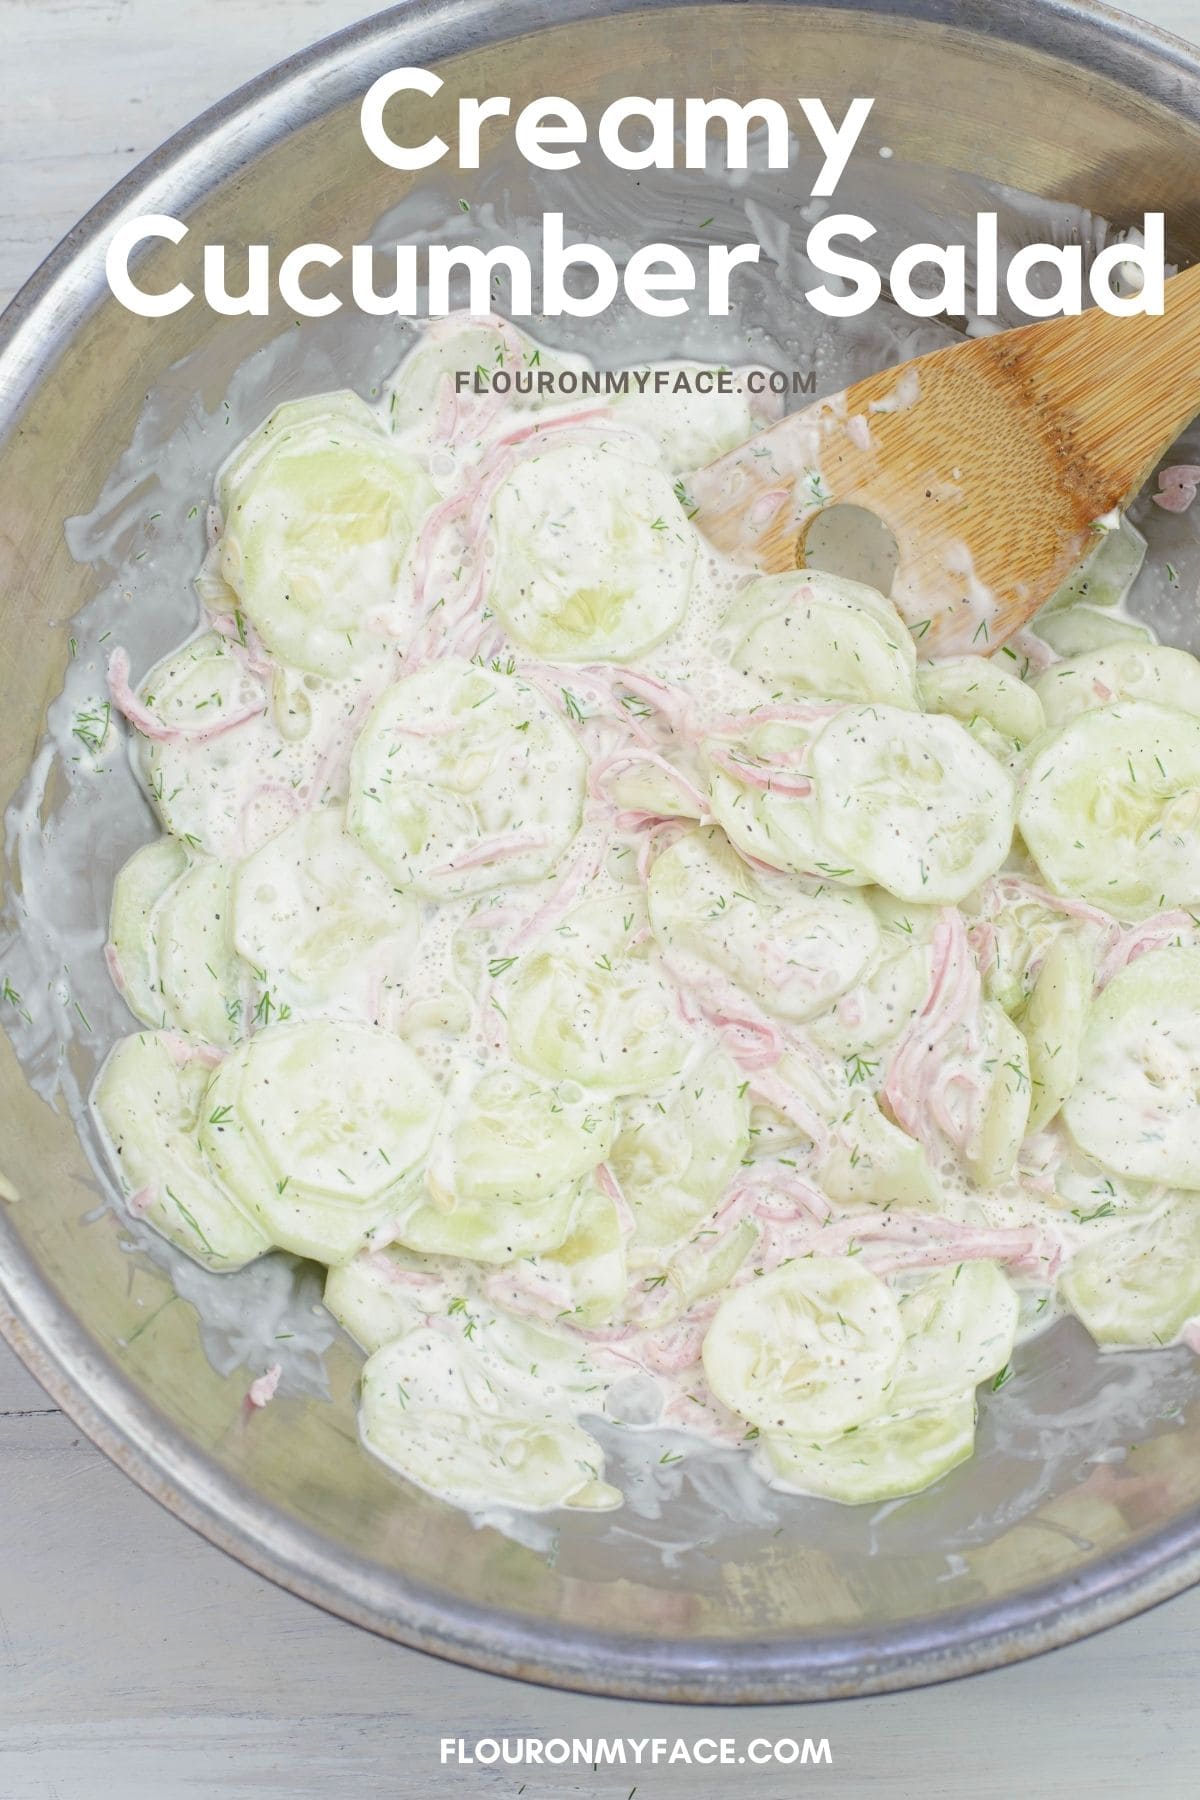 Vertical image of a metal mixing bowl filled with cucumber salad.